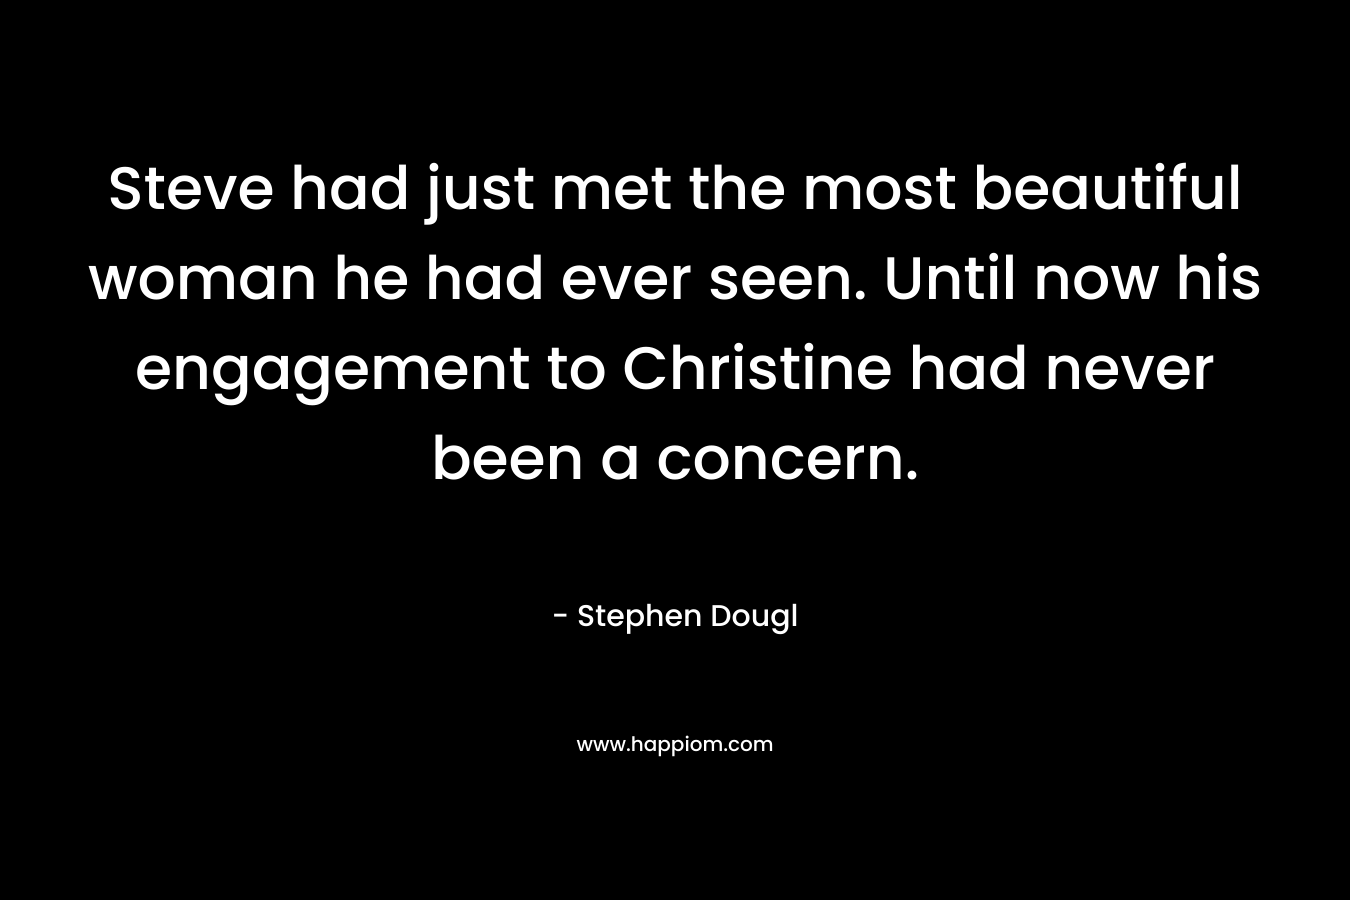 Steve had just met the most beautiful woman he had ever seen. Until now his engagement to Christine had never been a concern. – Stephen Dougl